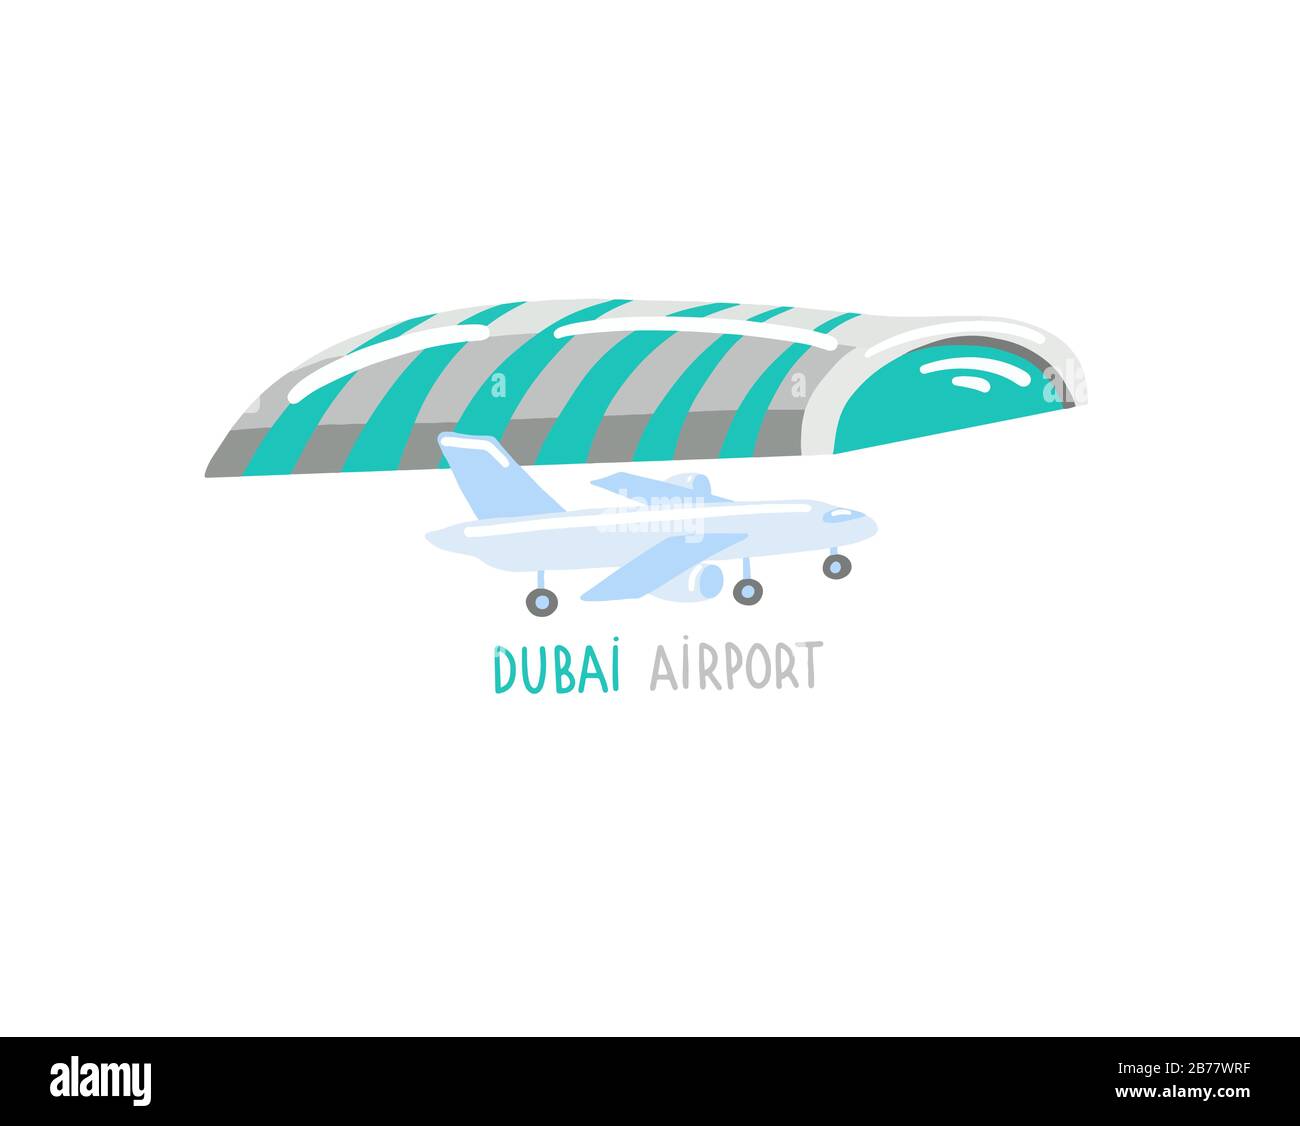 Dubai airport - hand drawing icon in flat style, United Arab Emirates Stock Vector